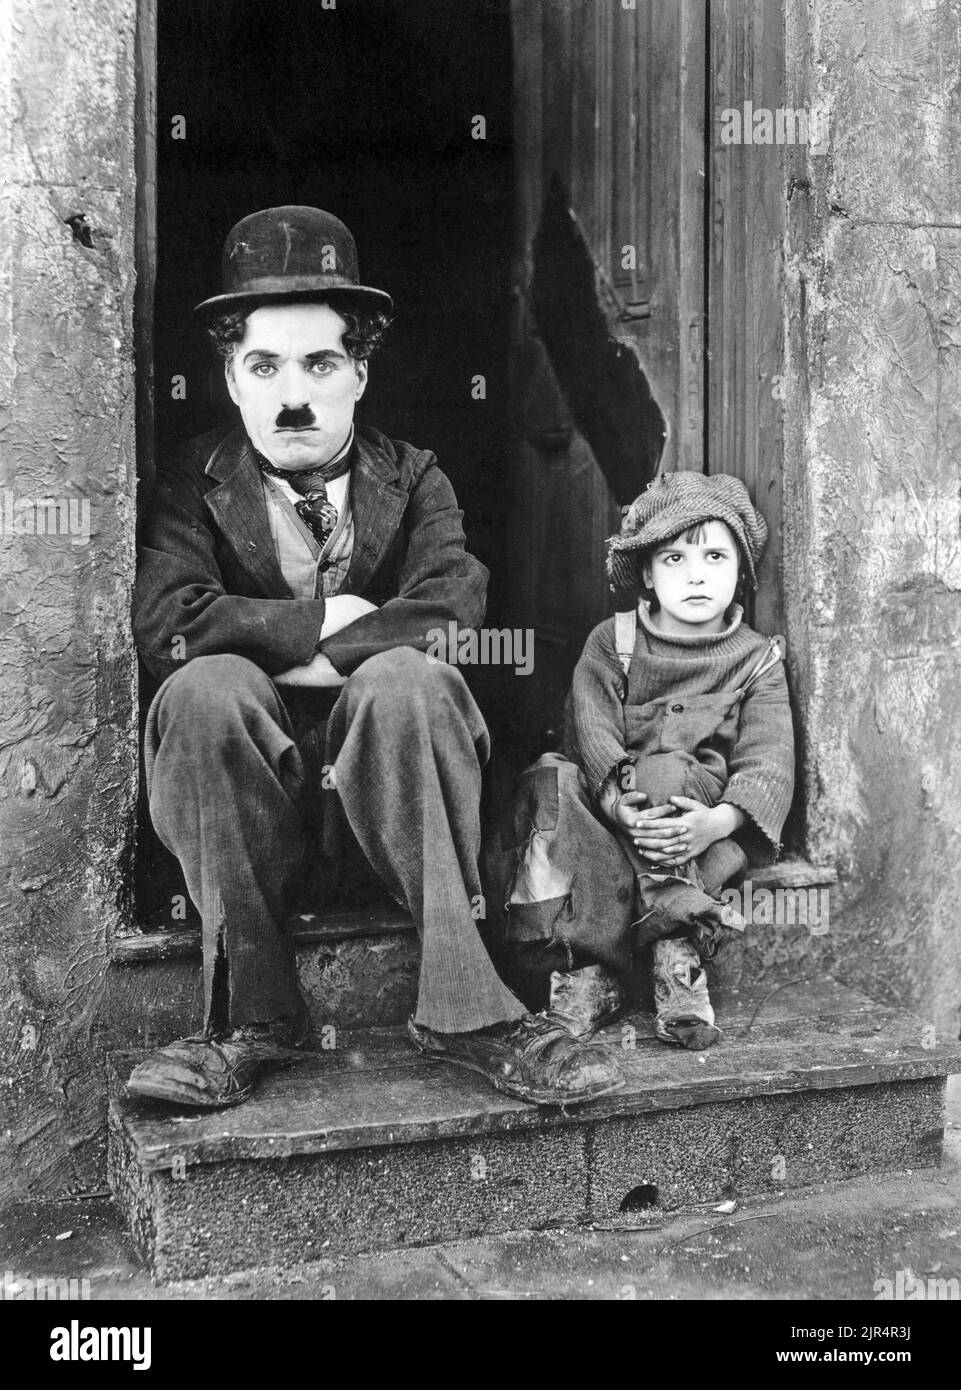 Charlie Chaplin - The Kid - a 1921 American silent comedy-drama film written, produced, directed by and starring Charlie Chaplin, and features Jackie Coogan as his foundling baby, adopted son and sidekick. Stock Photo